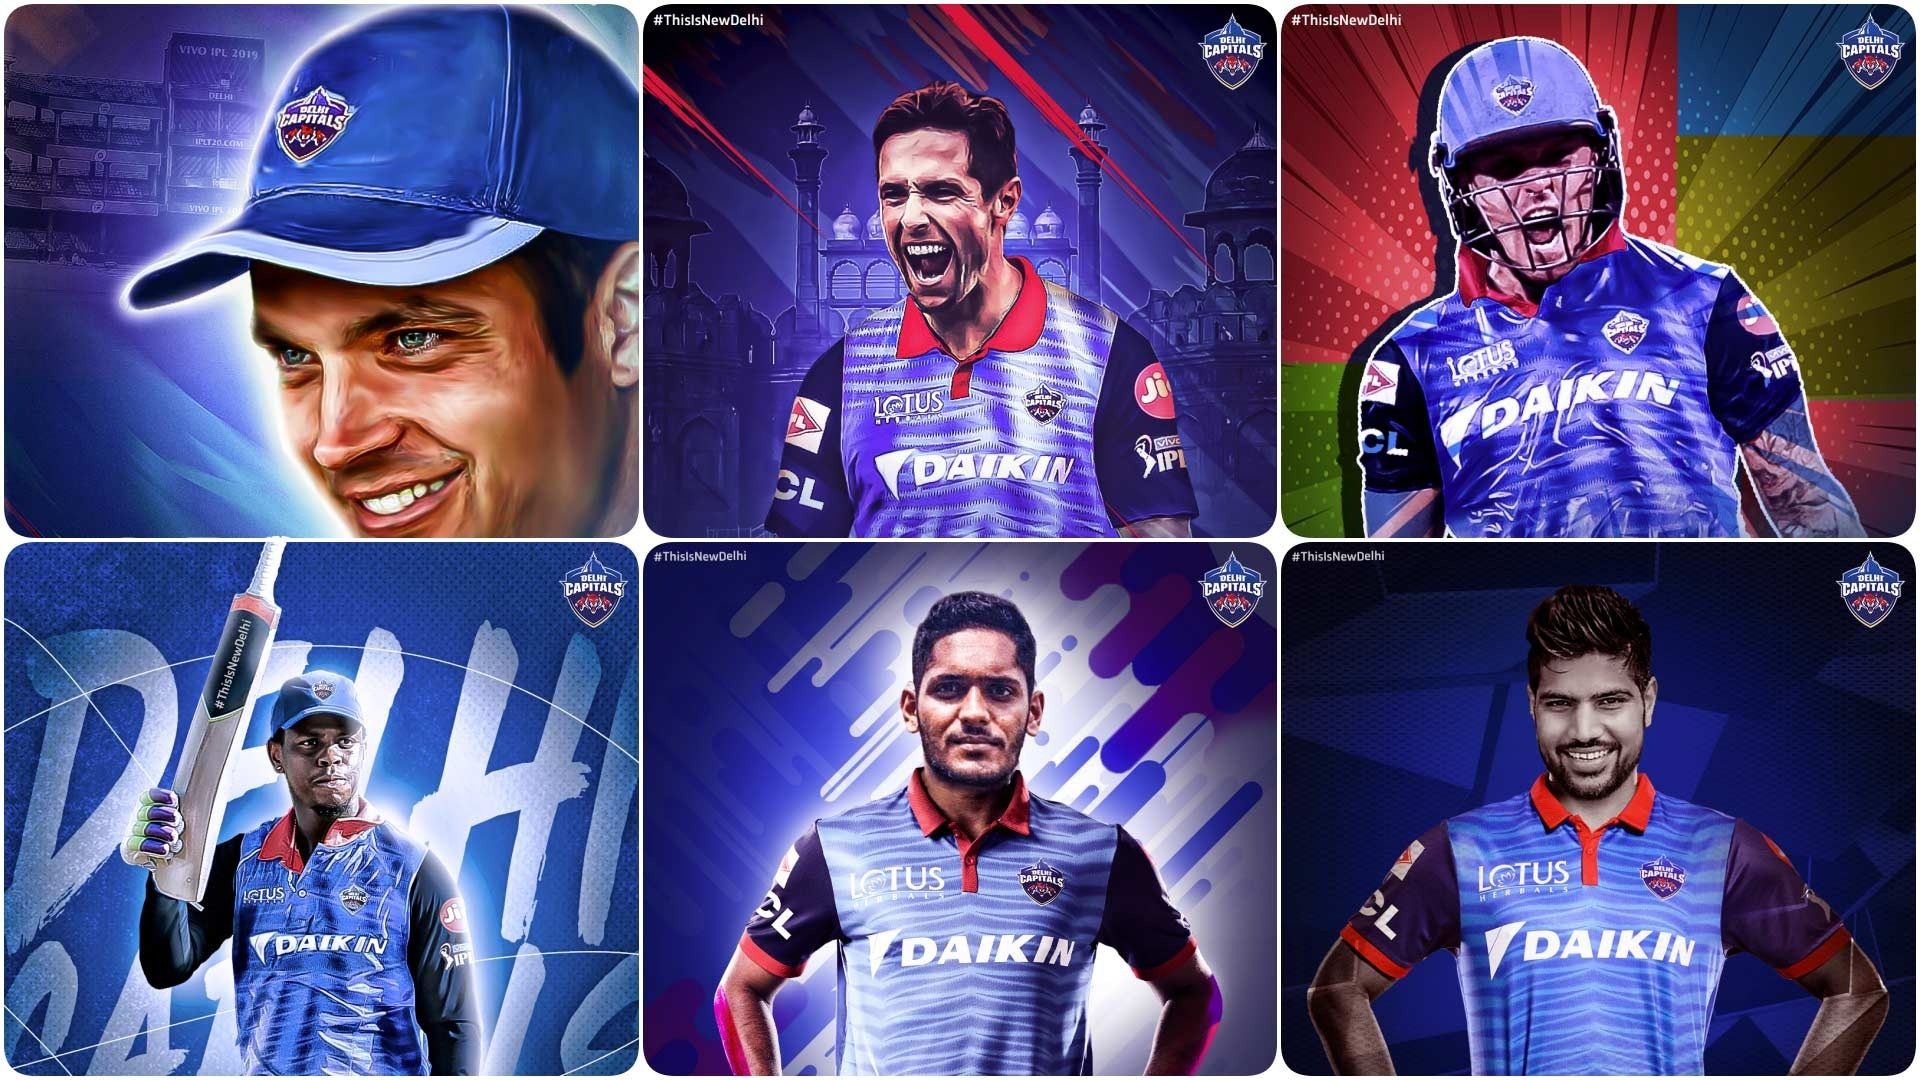 Ipl 2020 Auction Buys - Dc Ipl 2020 Jersey , HD Wallpaper & Backgrounds